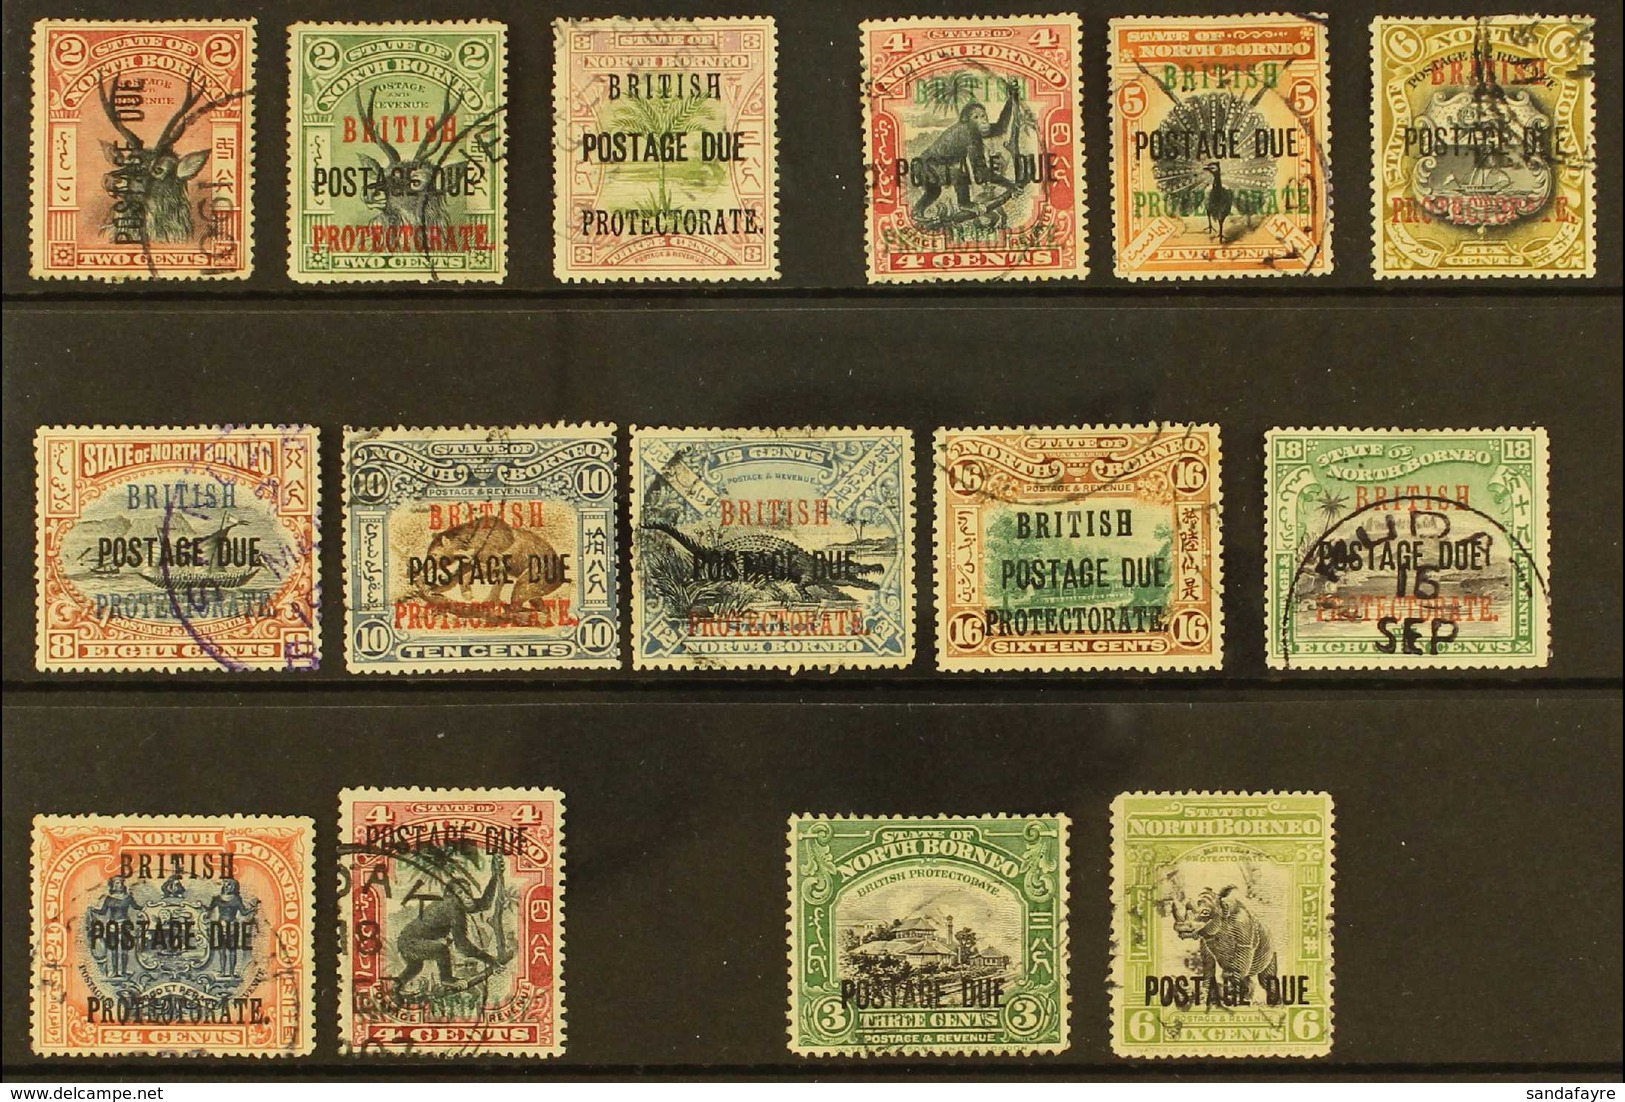 POSTAGE DUES 1897 - 1930 Fine Postally Used Selection With Cds Cancels Including 1902 Vals To 24c, 1906 4c Black And Car - Noord Borneo (...-1963)